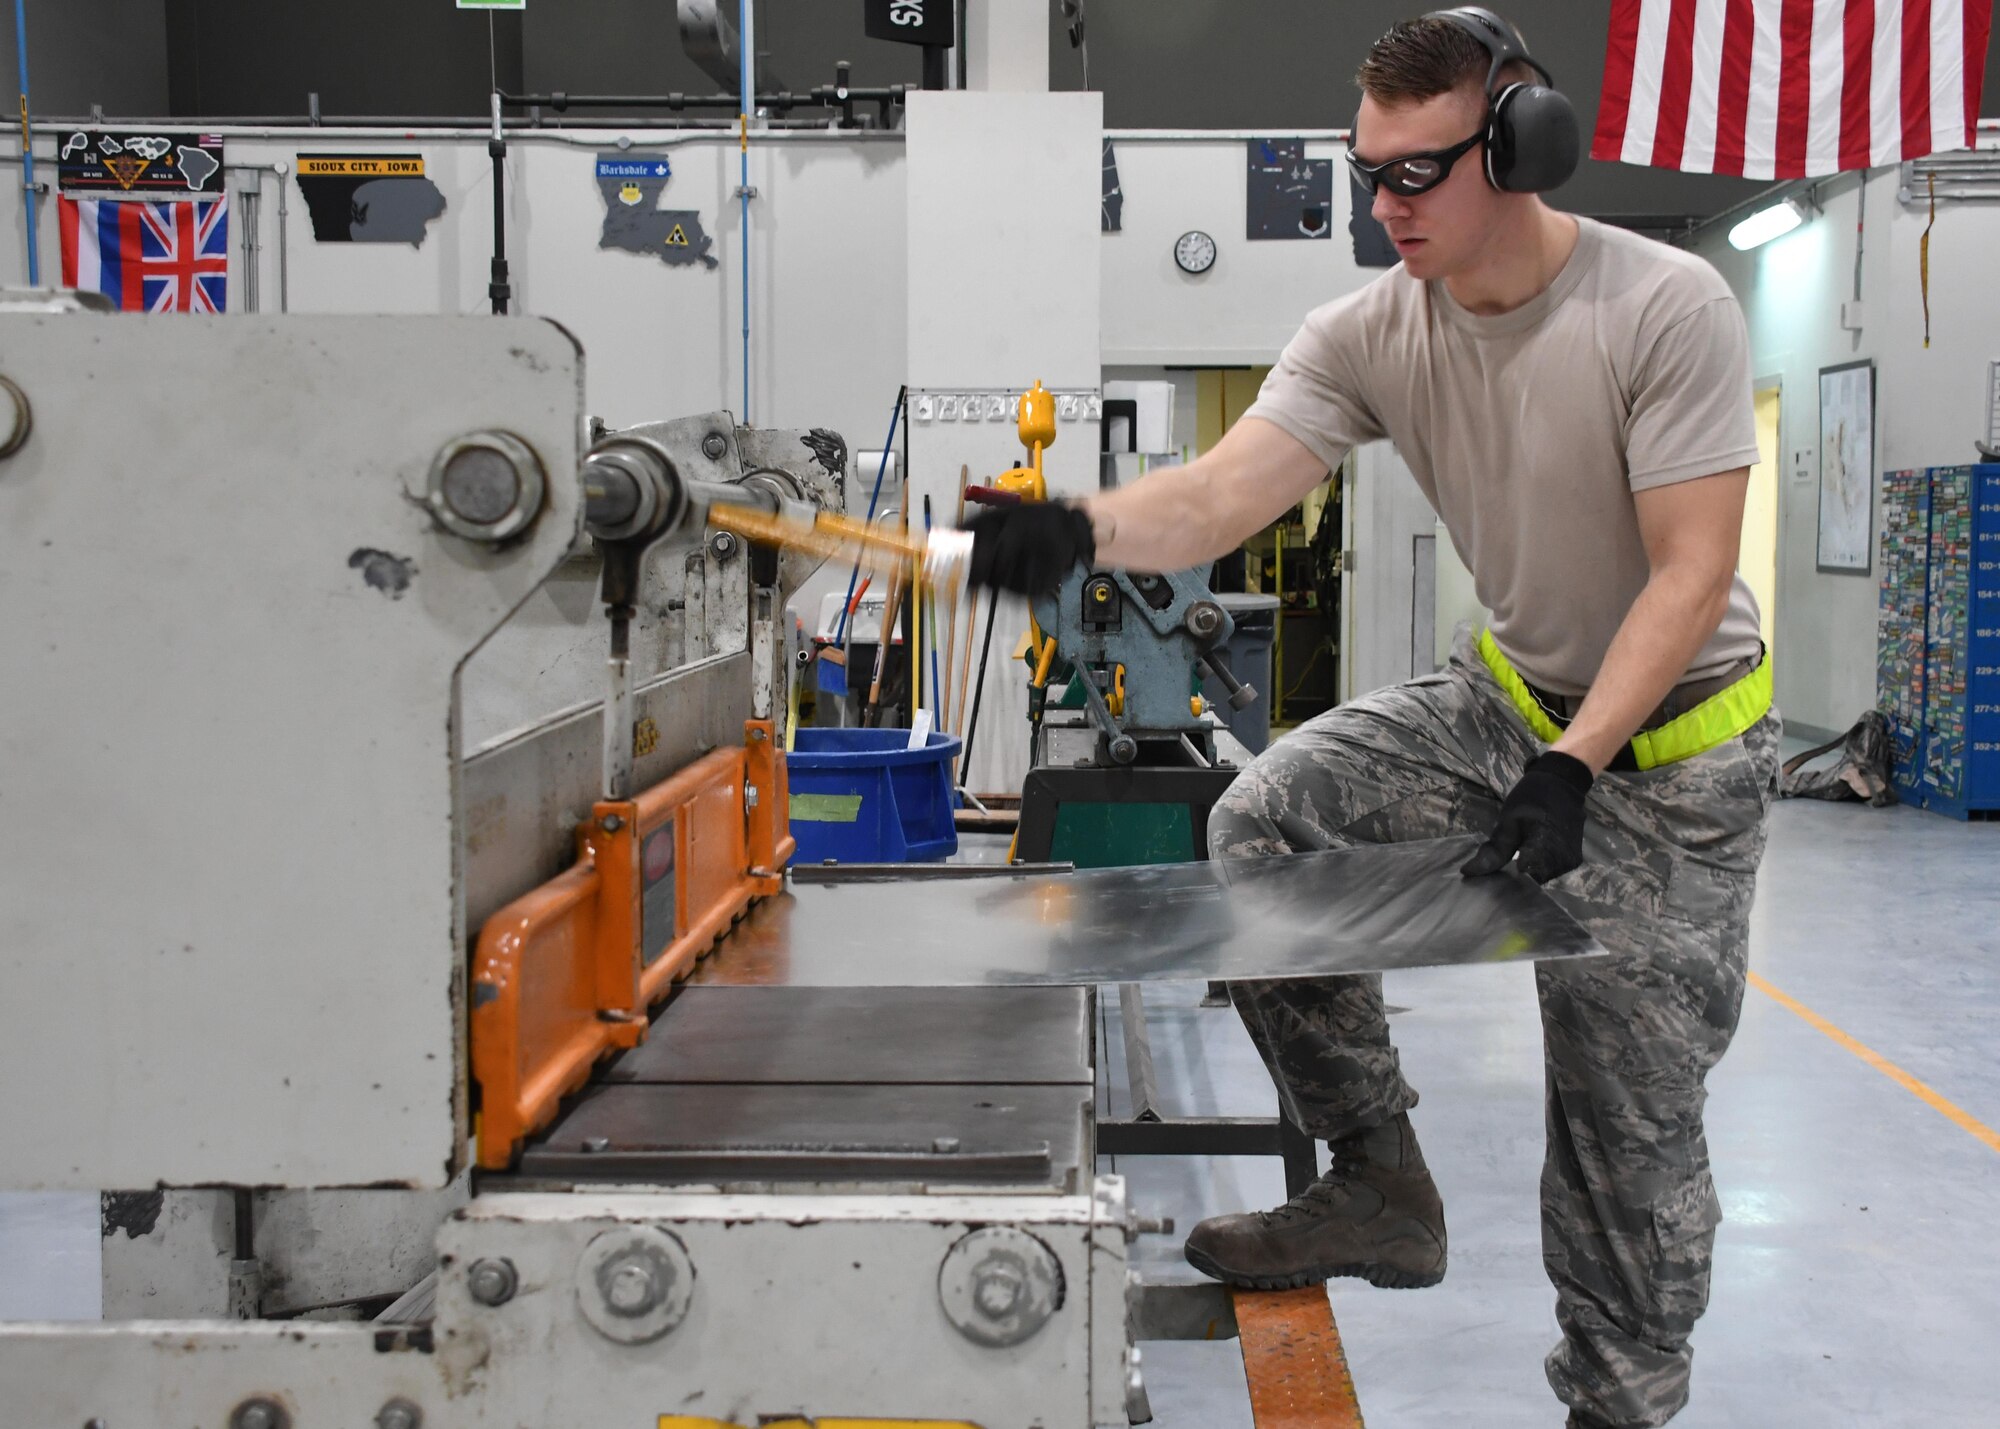 U.S. Air Force Airman 1st Class Levi Amell, an aircraft structural maintenance journeyman with the 379th Expeditionary Maintenance Squadron Sheet Metal Shop, cuts a sheet of metal using a foot shear at Al Udeid Air Base, Qatar, Feb. 16, 2017. Amell needed to cut the metal to specific measurements to fit it into place on an outbound flap for an aircraft that lost a piece of metal during flight. (U.S. Air Force photo by Senior Airman Miles Wilson)